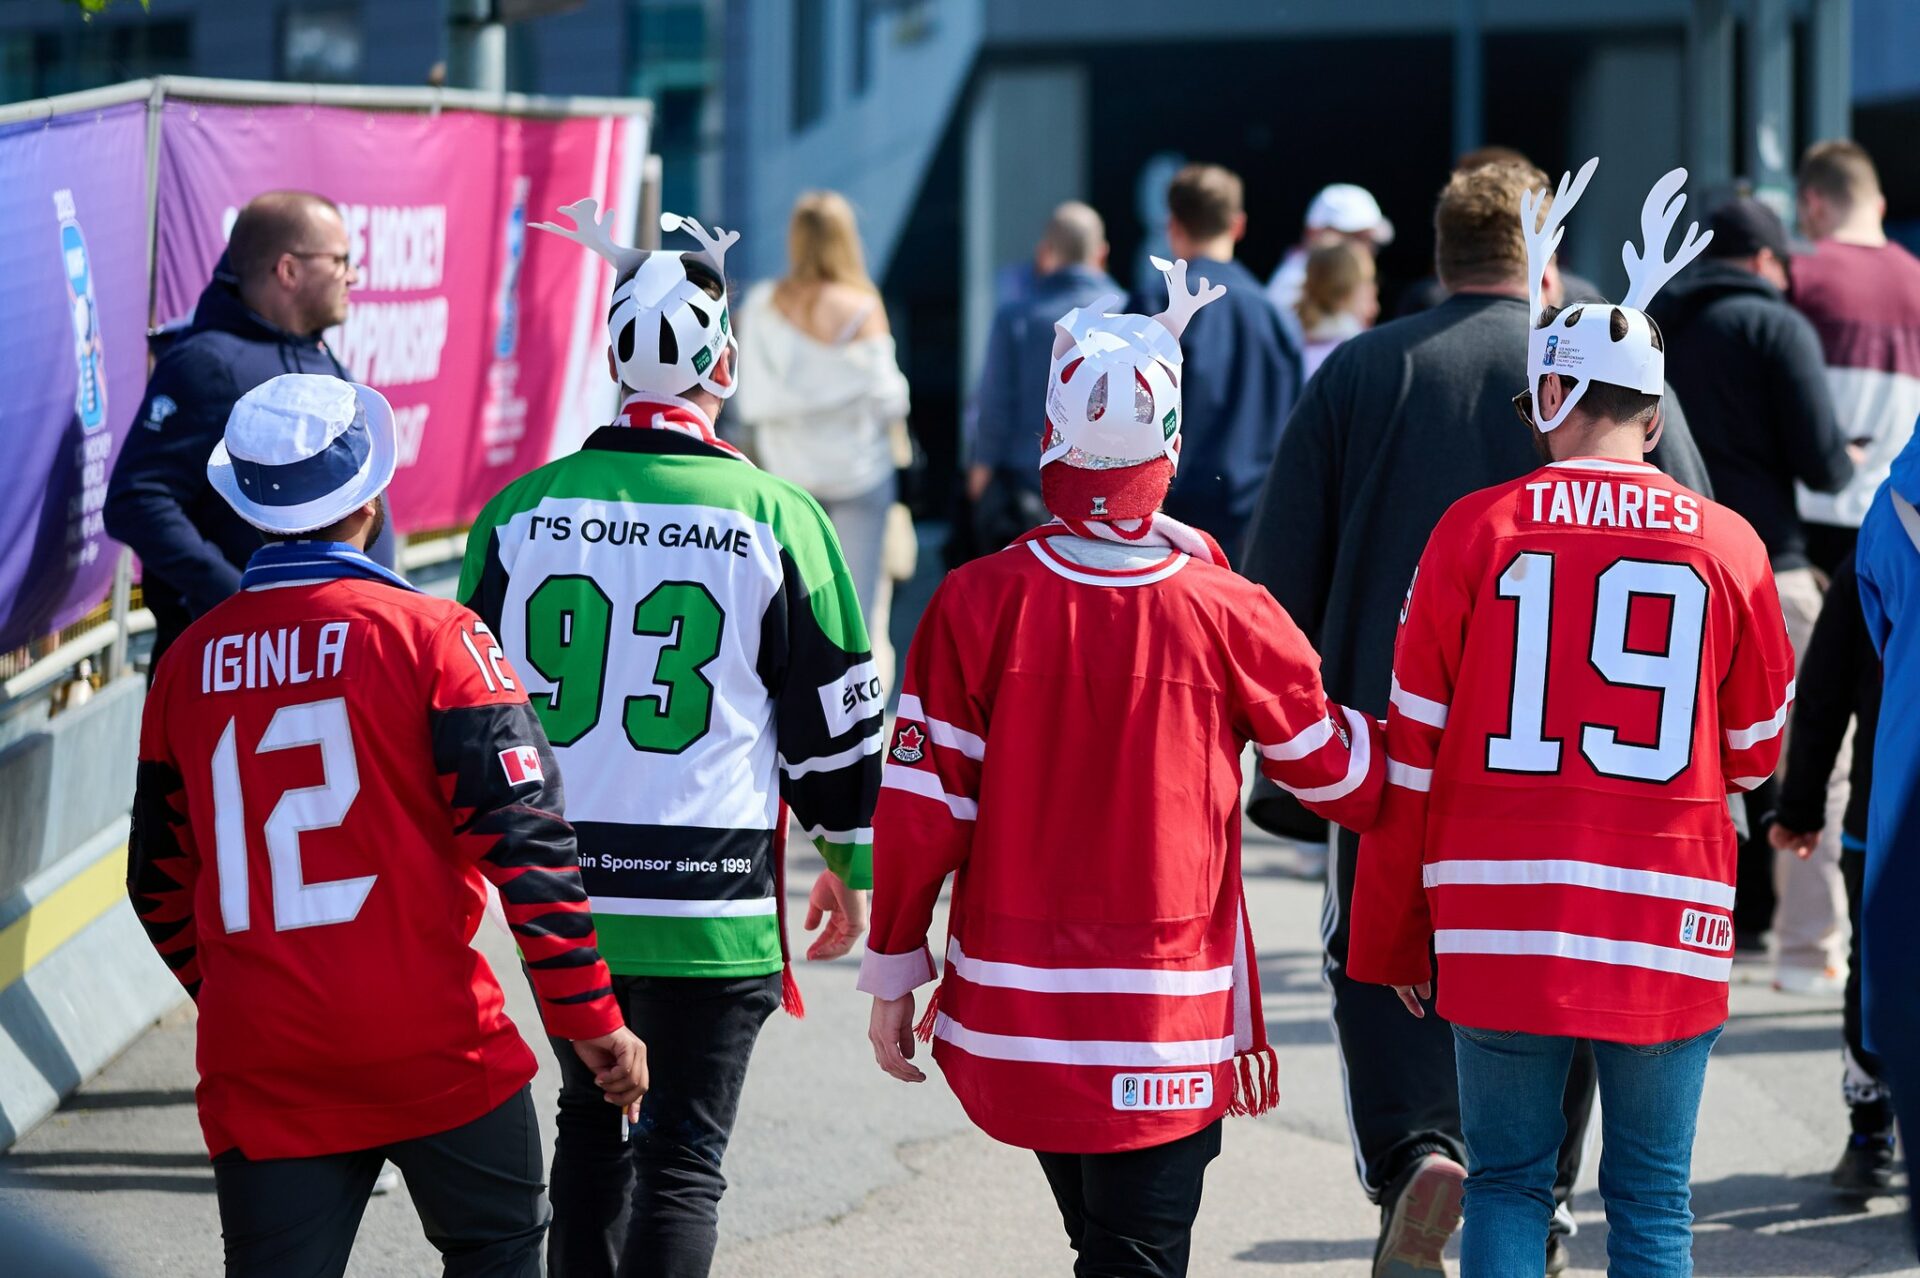 Canadian hockey fans in the streets of Tampere.